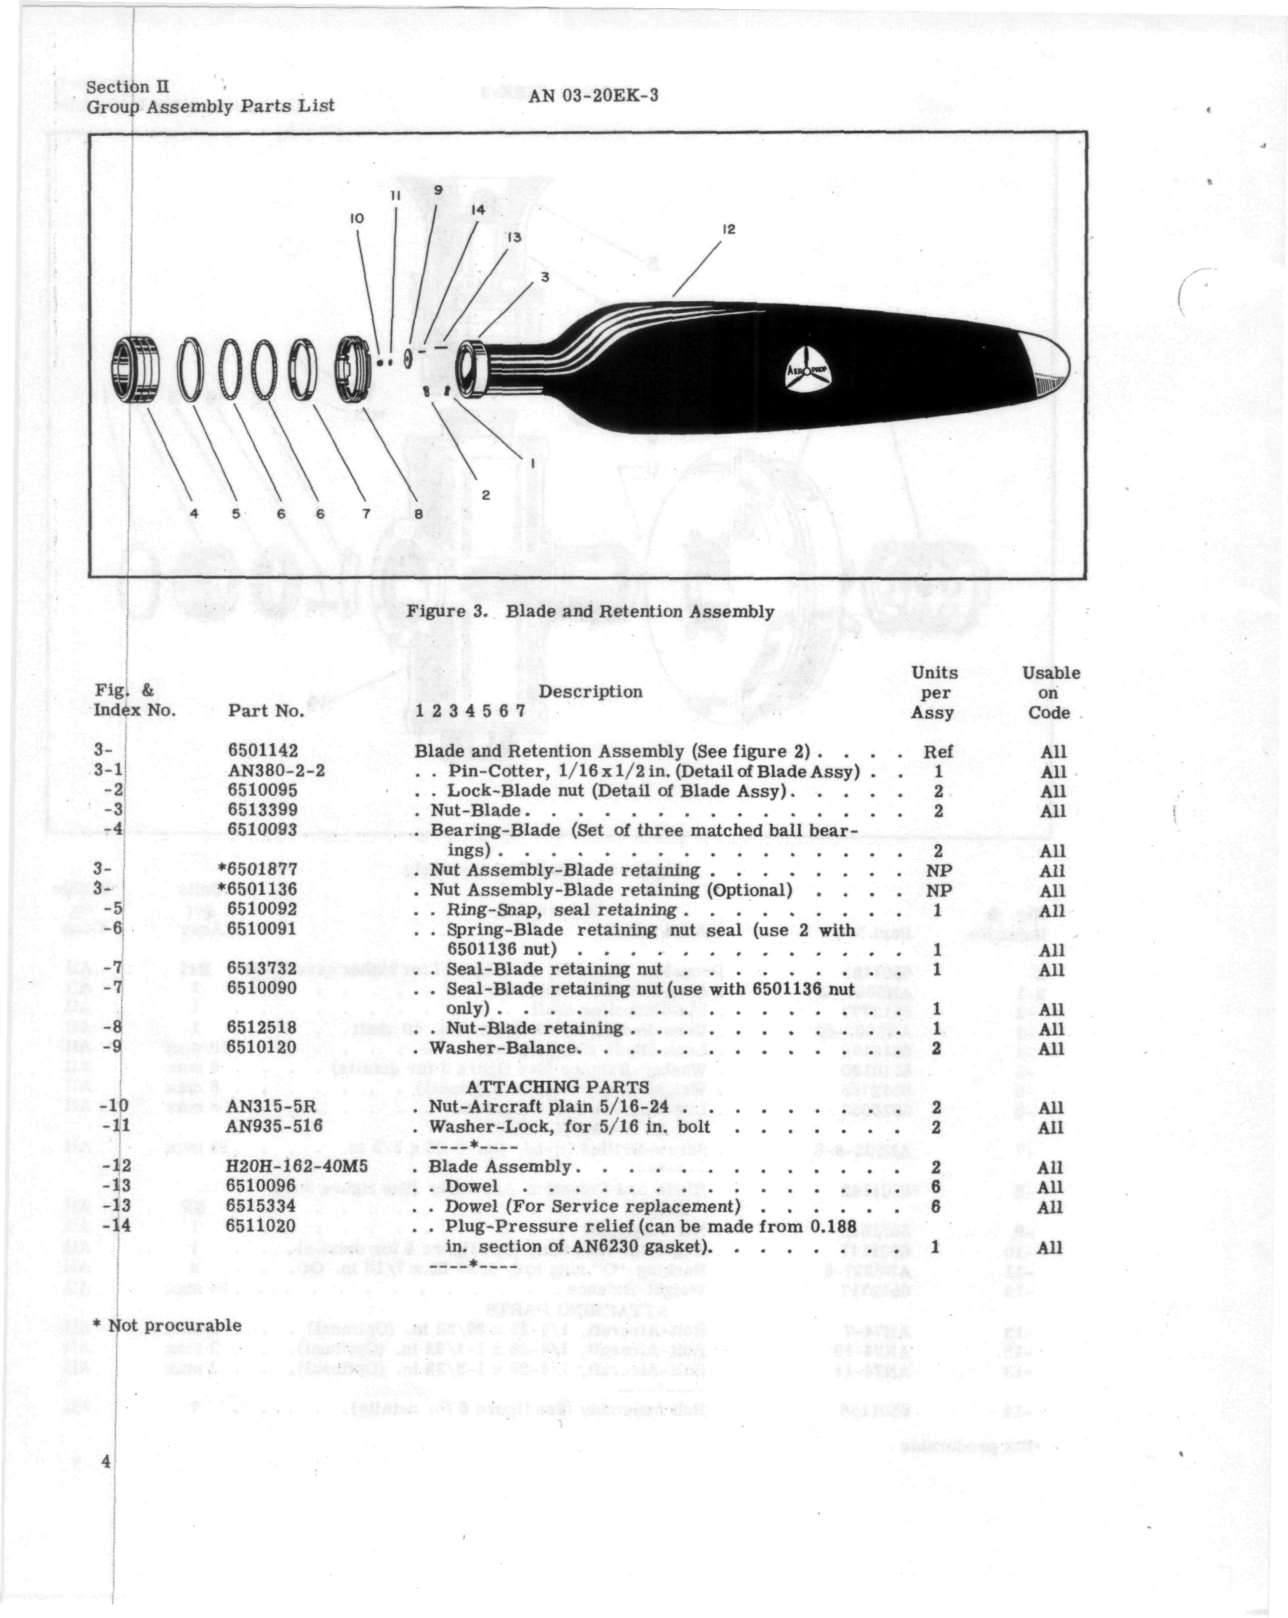 Sample page 6 from AirCorps Library document: Hydraulic Propeller Illustrated Parts Breakdown Model A422-E1